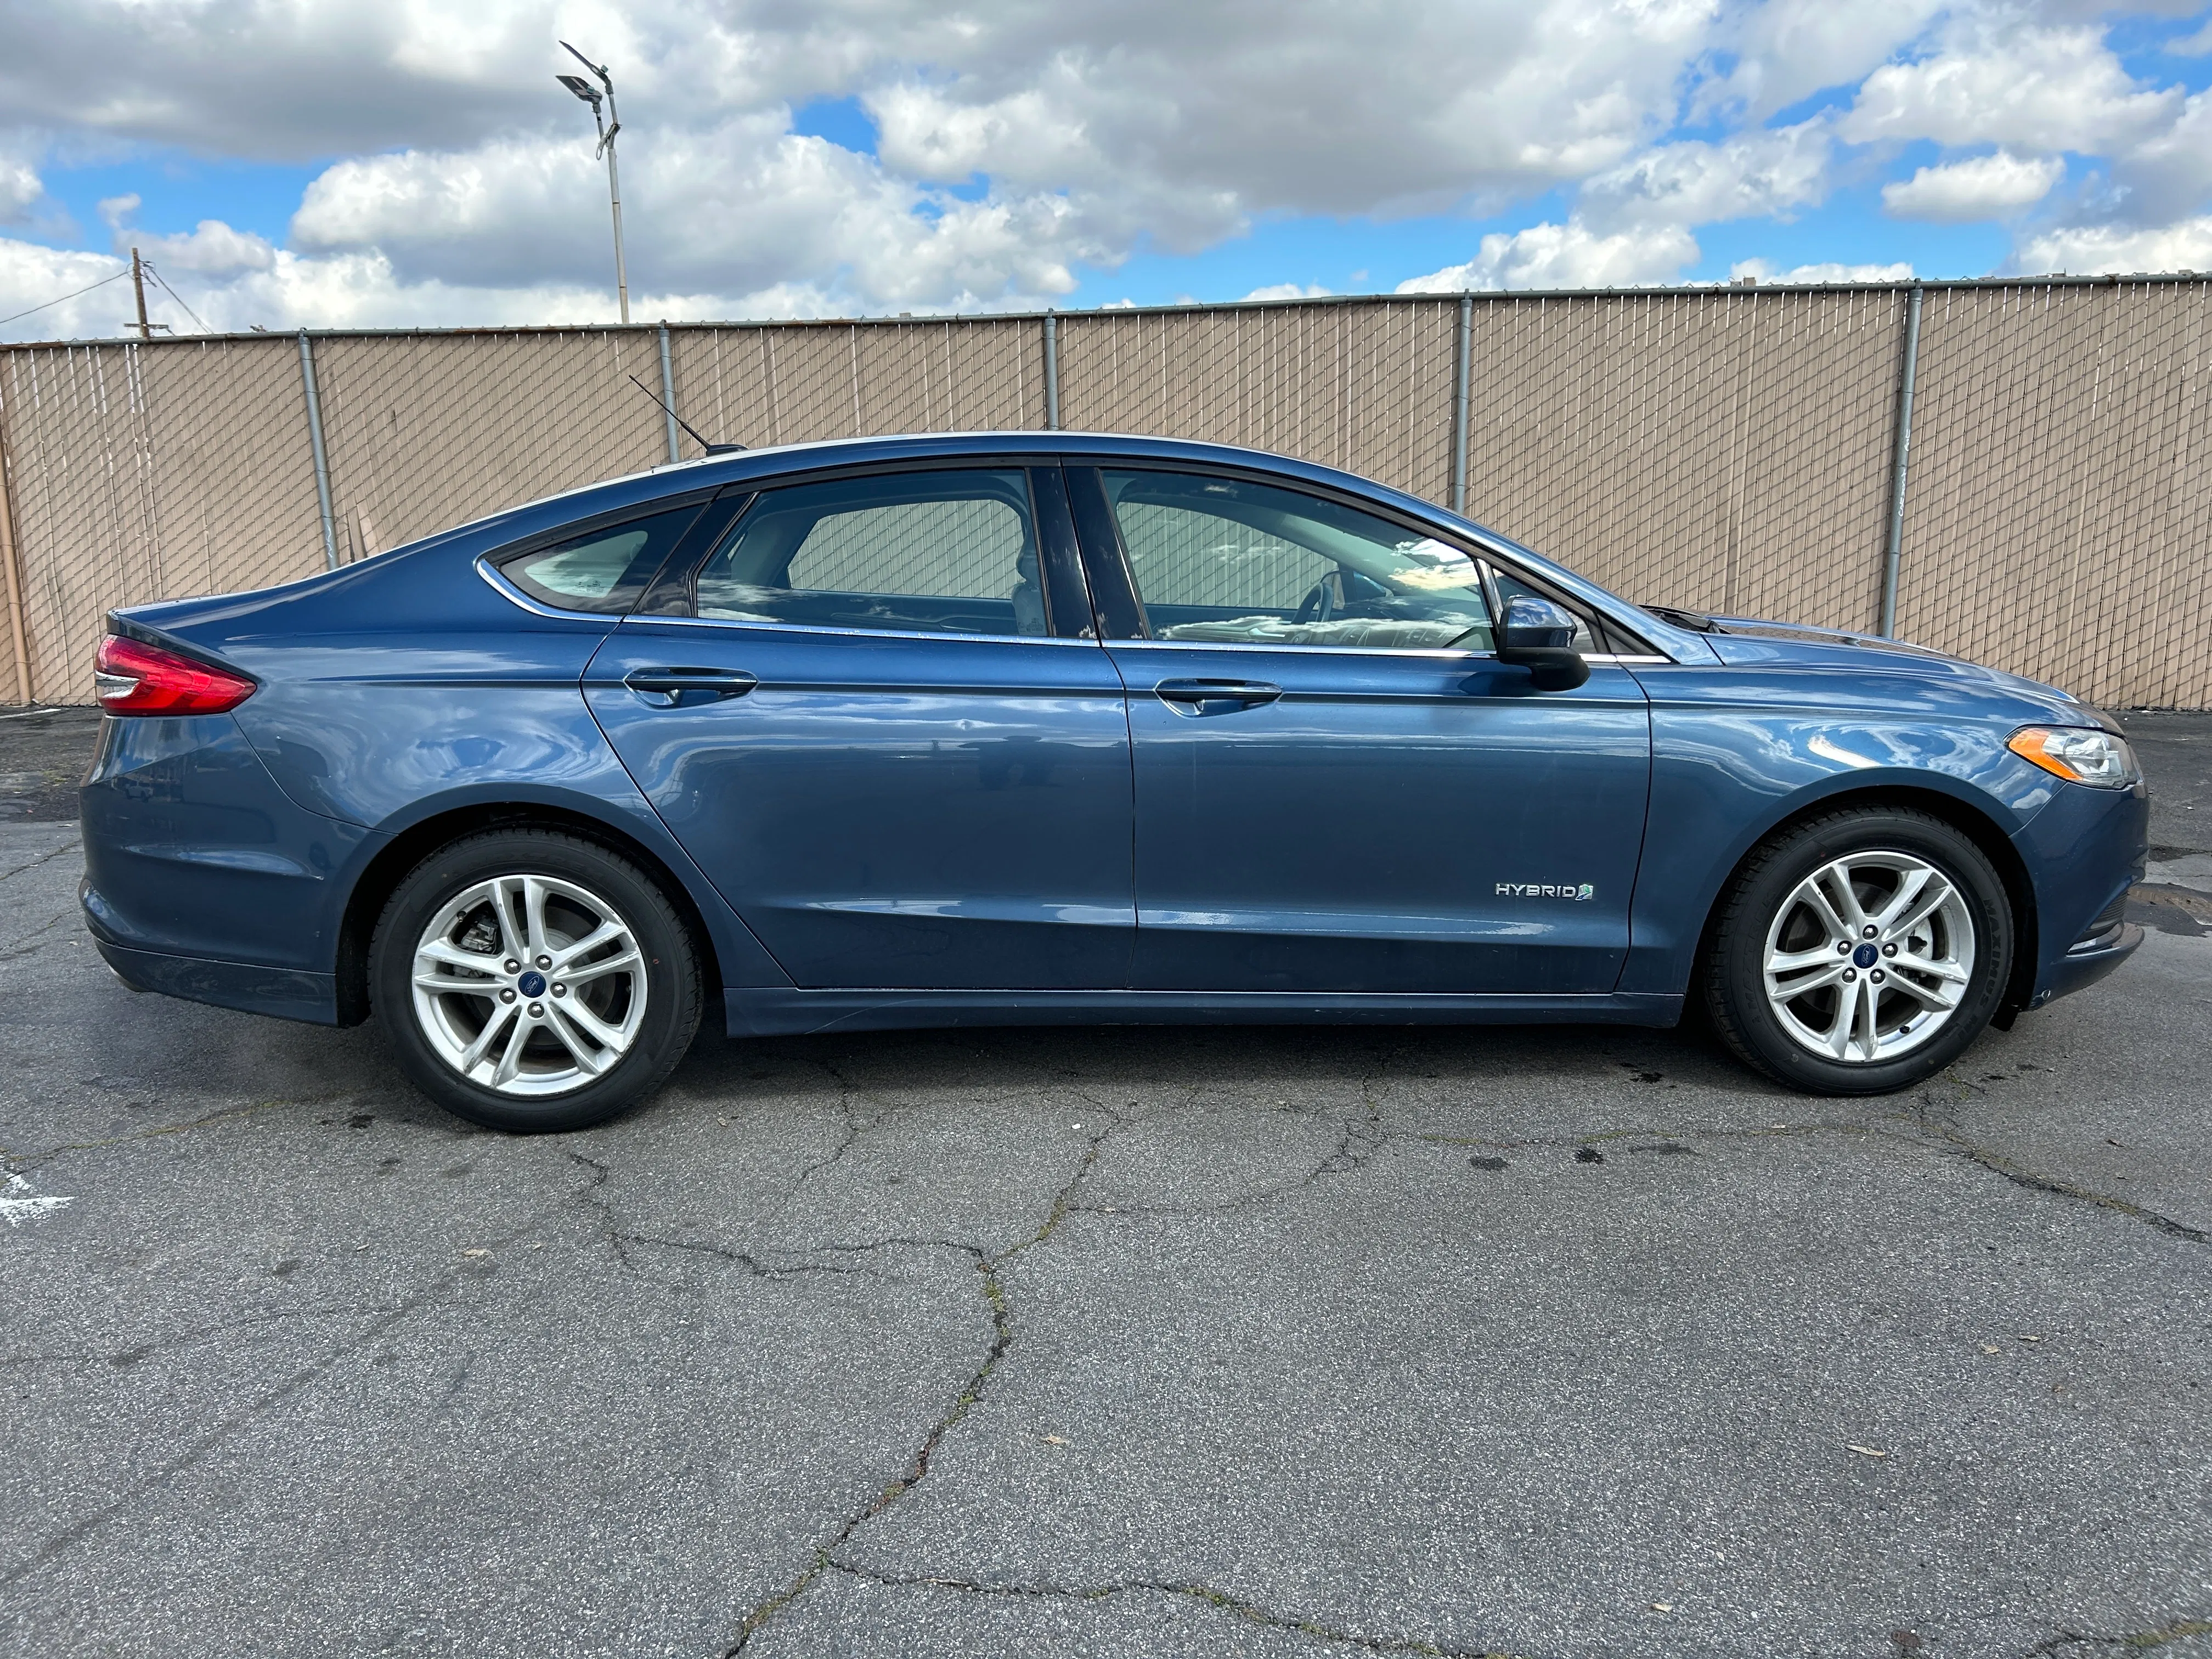 BLUE, 2018 FORD FUSION Image 3